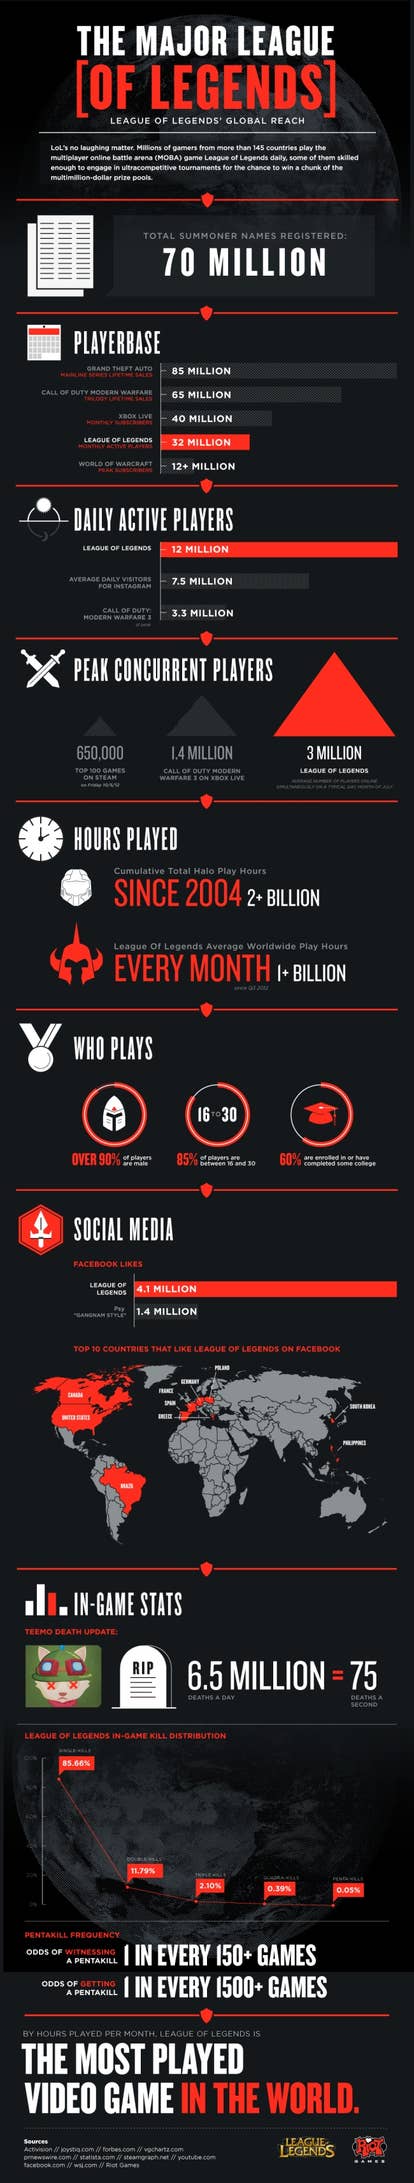 Teamfight Tactics has 33 million monthly active players, Riot